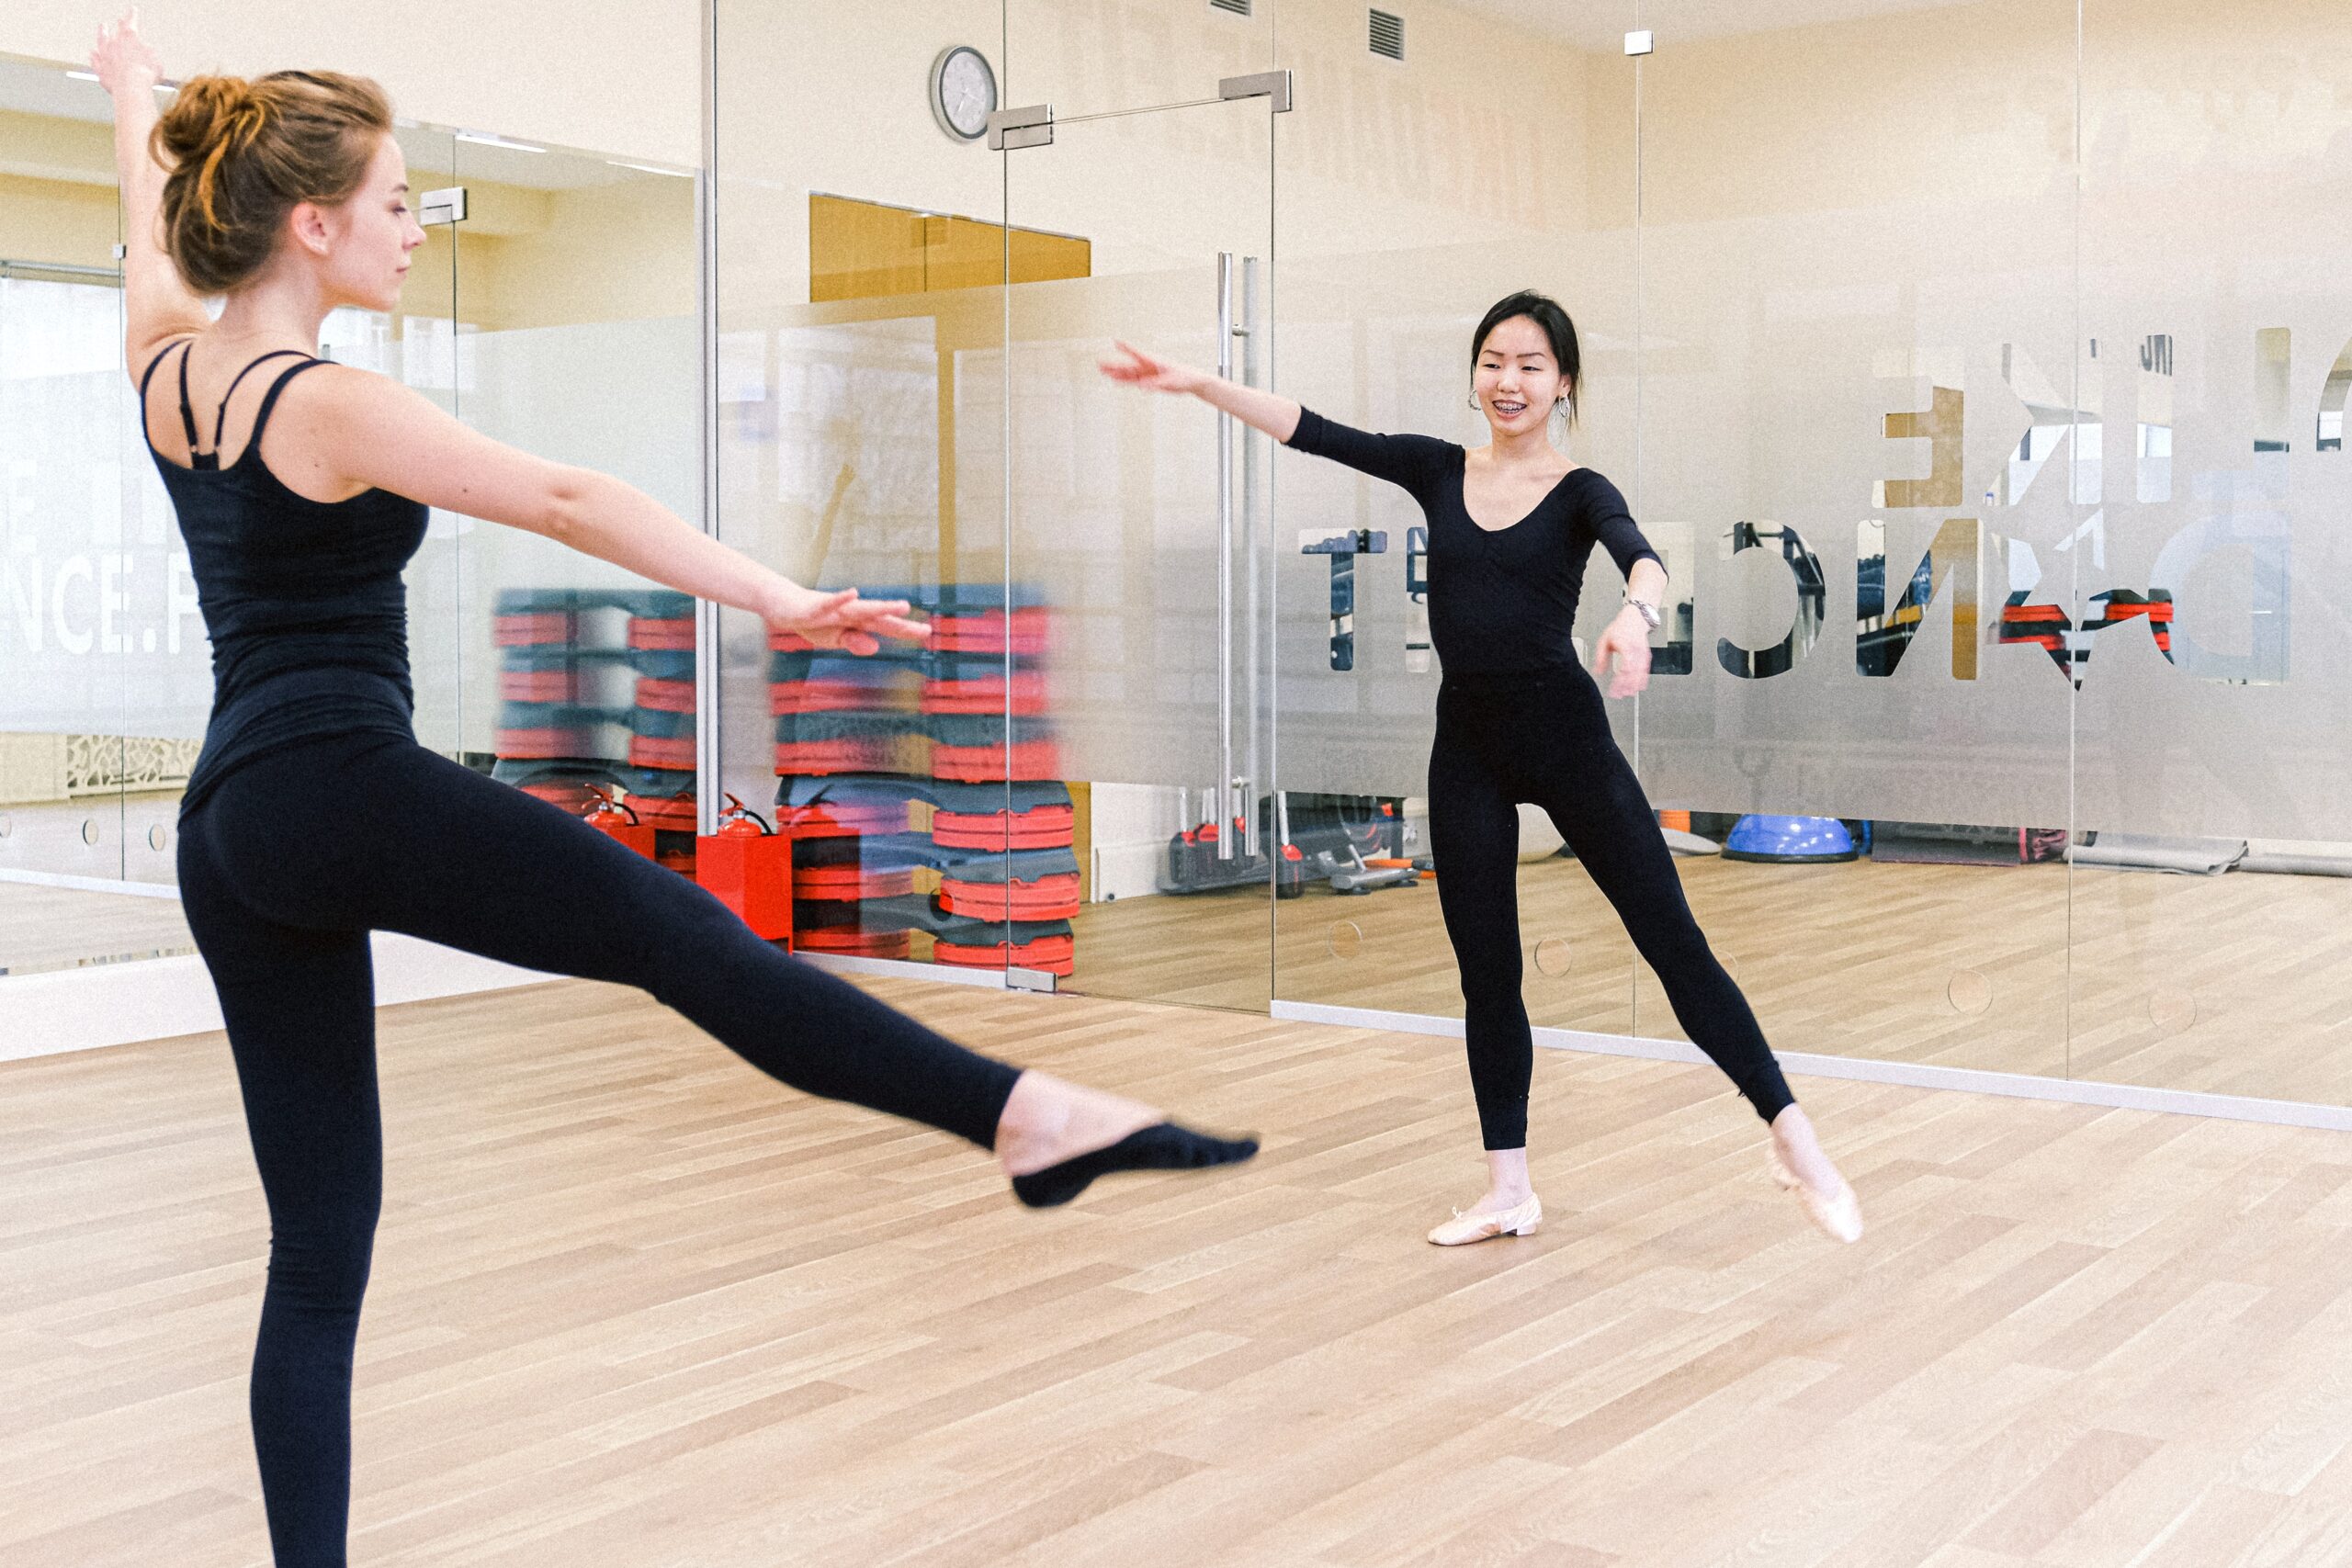 Dance/movement therapy class using ballet to teach in a studio.